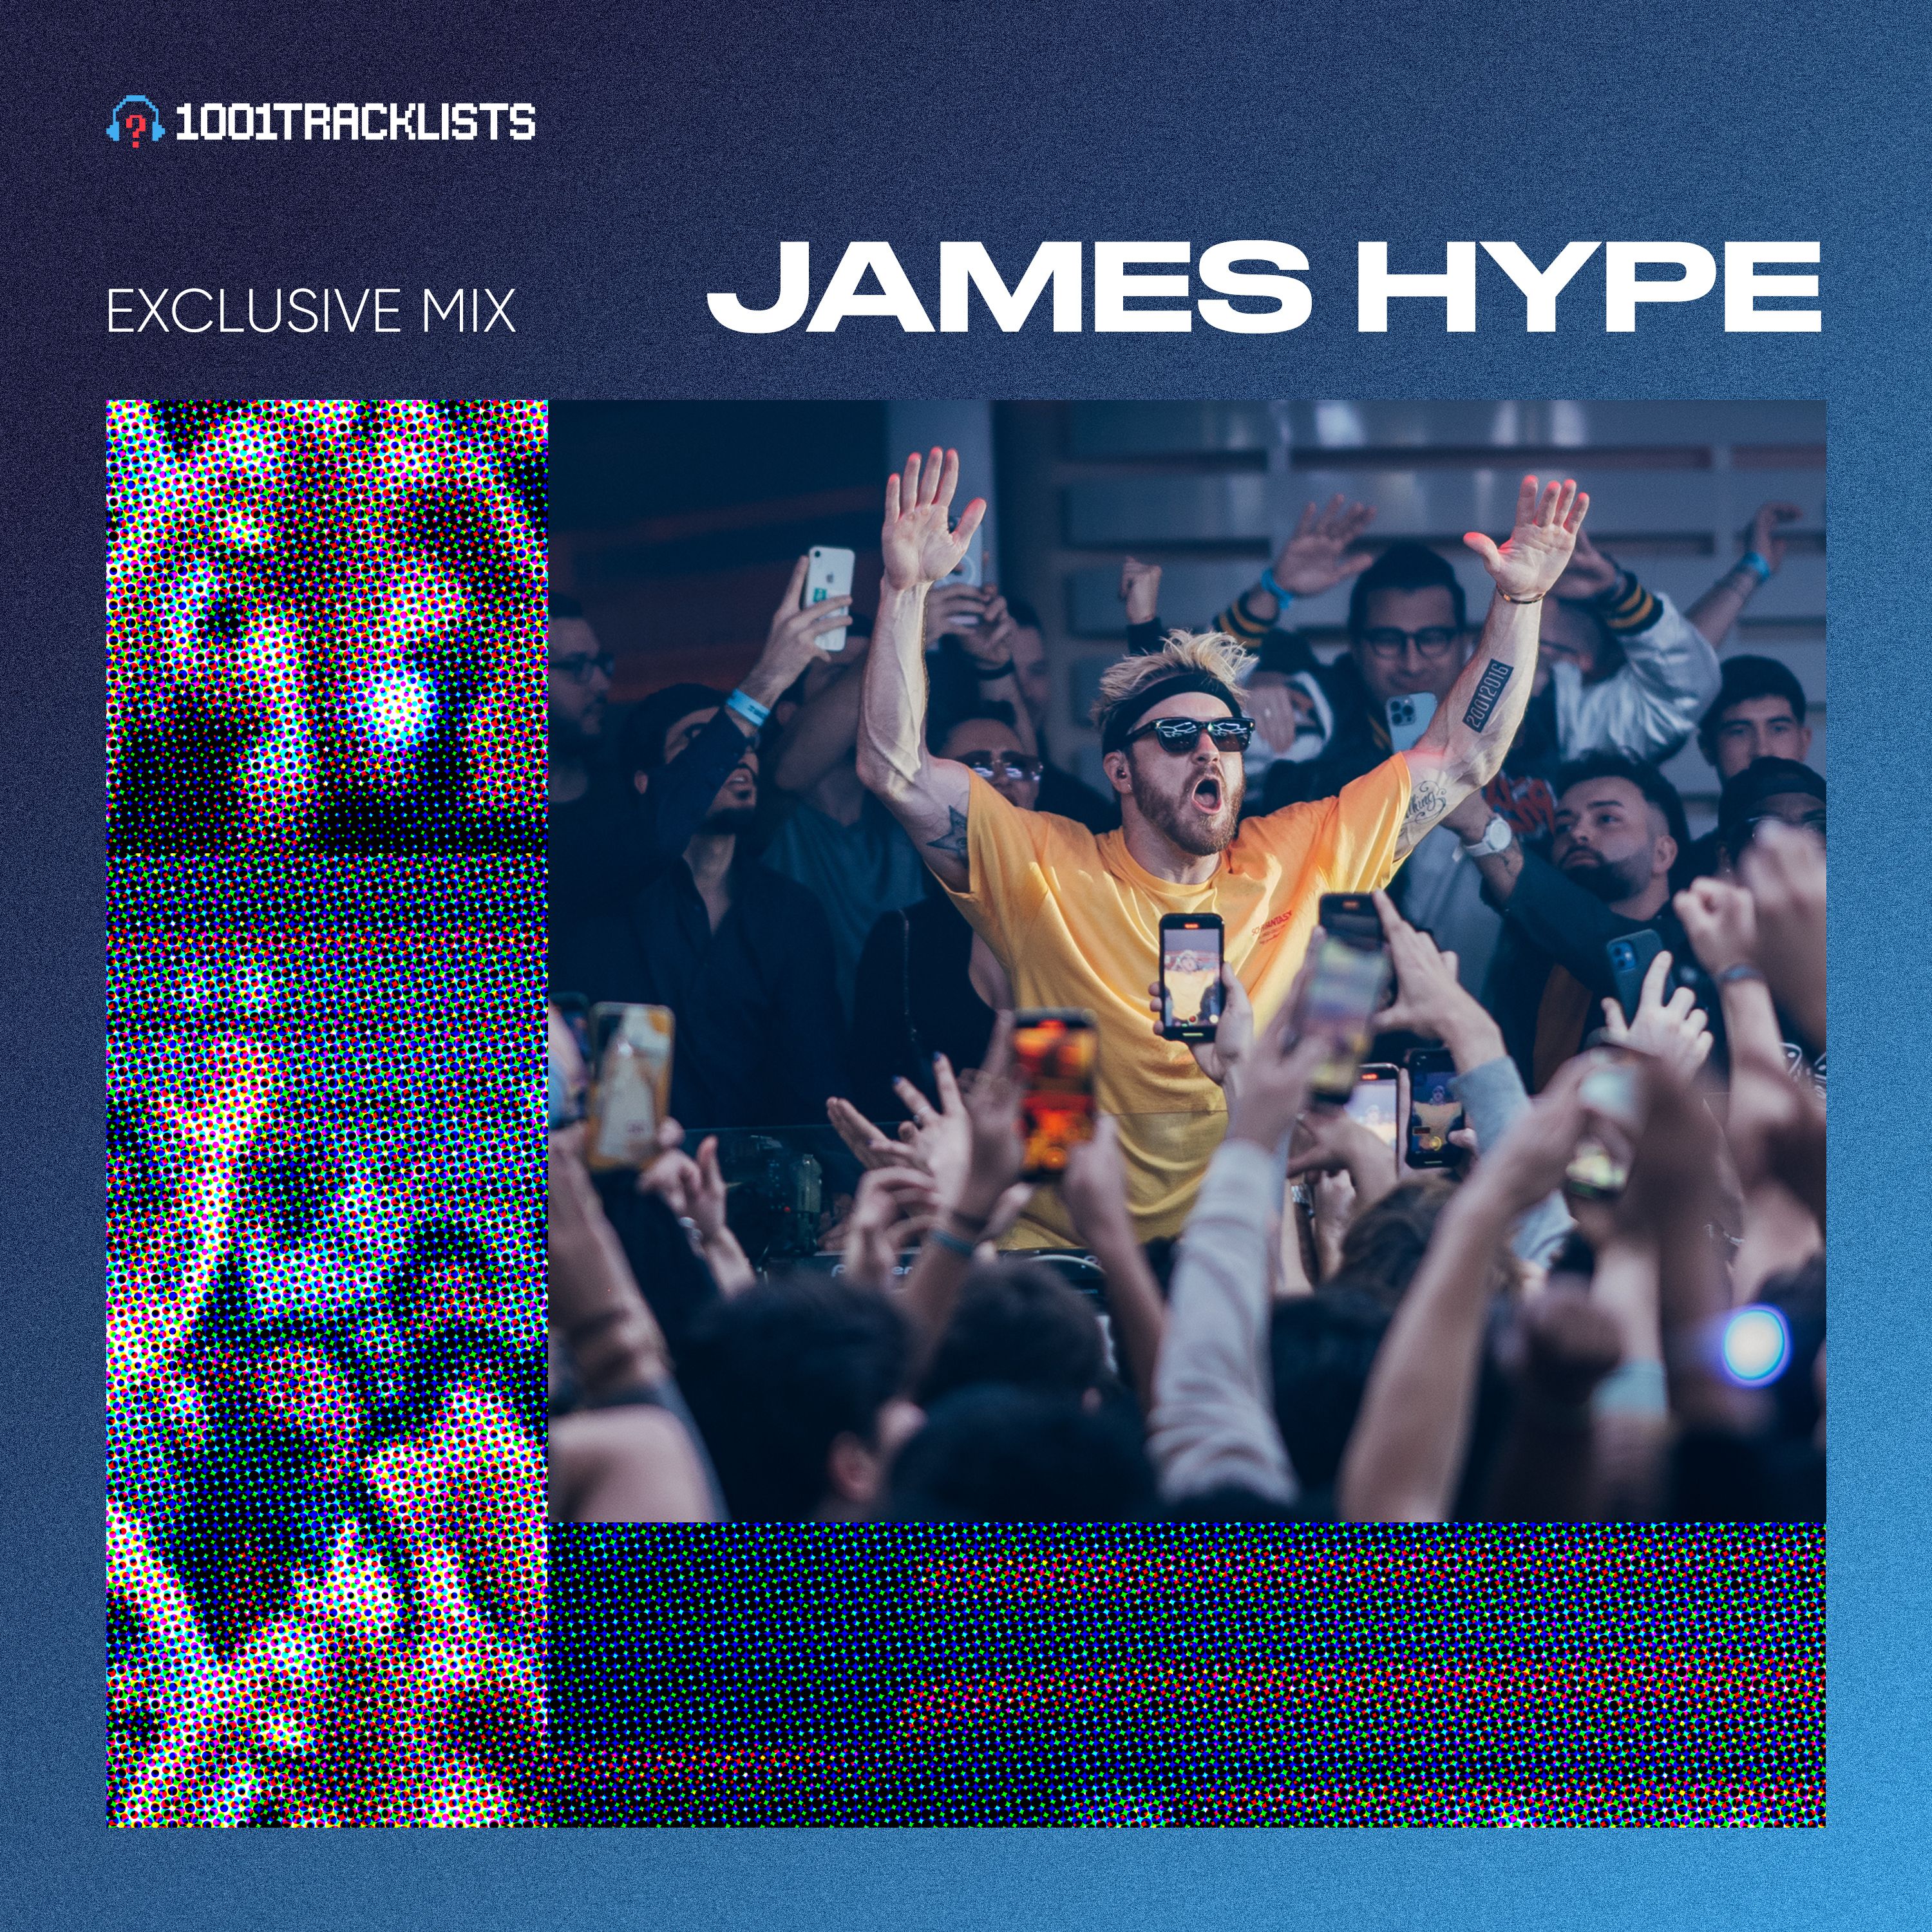 James Hype - 1001Tracklists “Helicopter